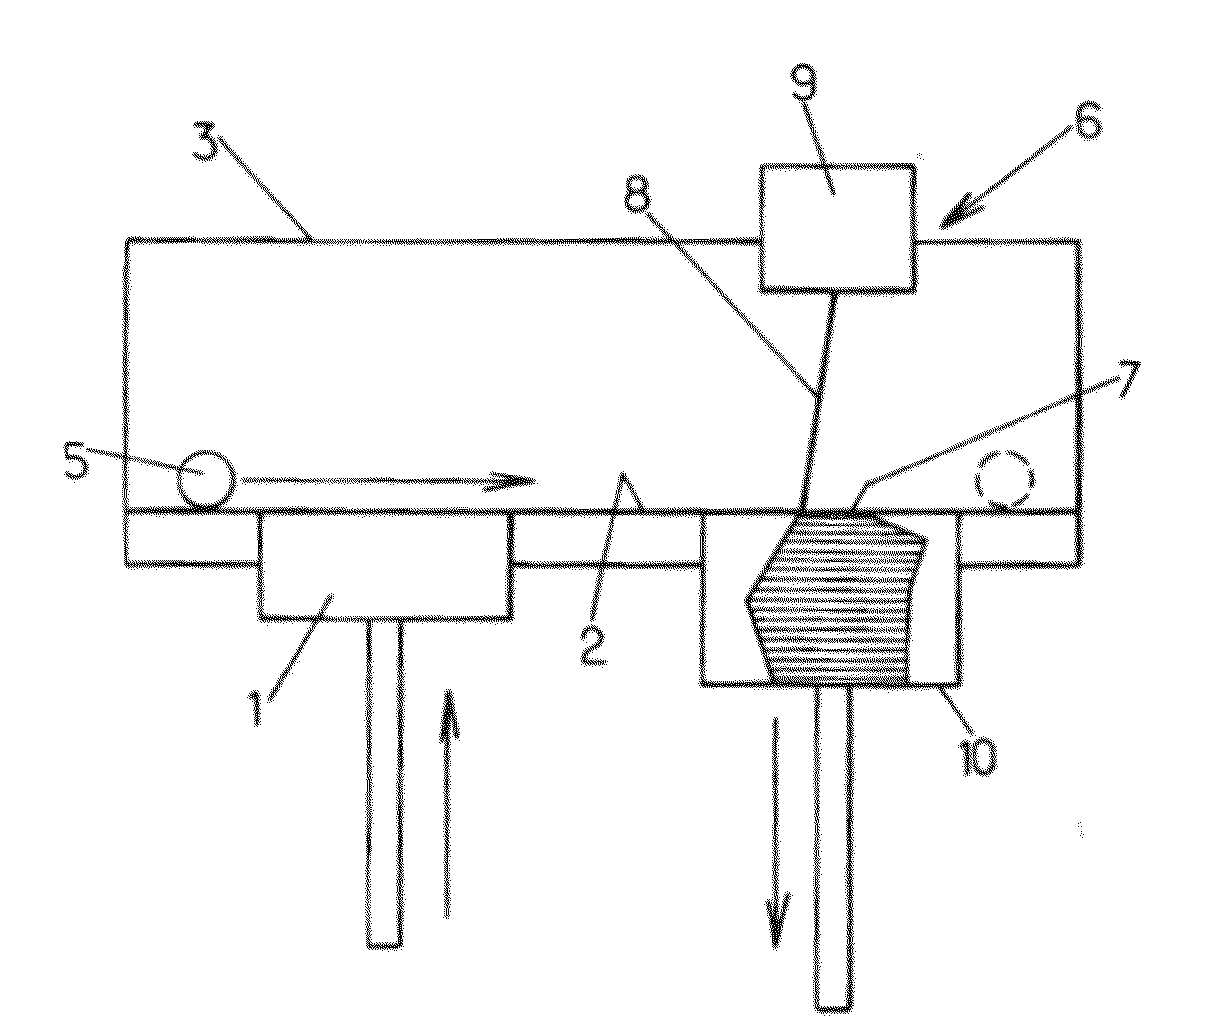 Biomedical device, method for manufacturing the same and use thereof